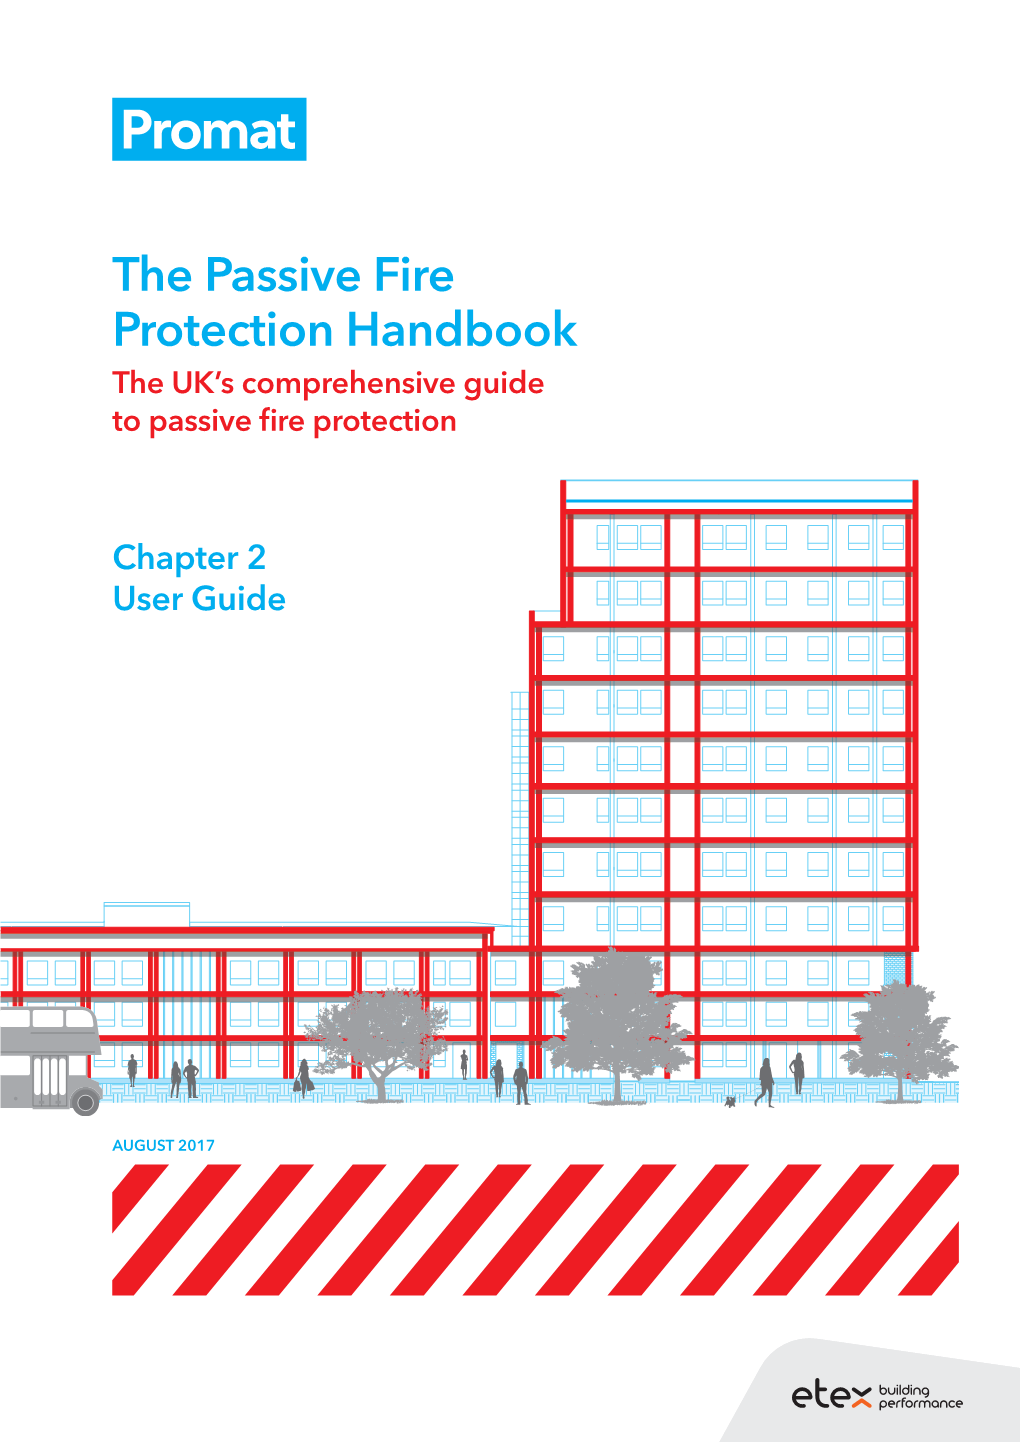 The Passive Fire Protection Handbook the UK’S Comprehensive Guide to Passive Fire Protection